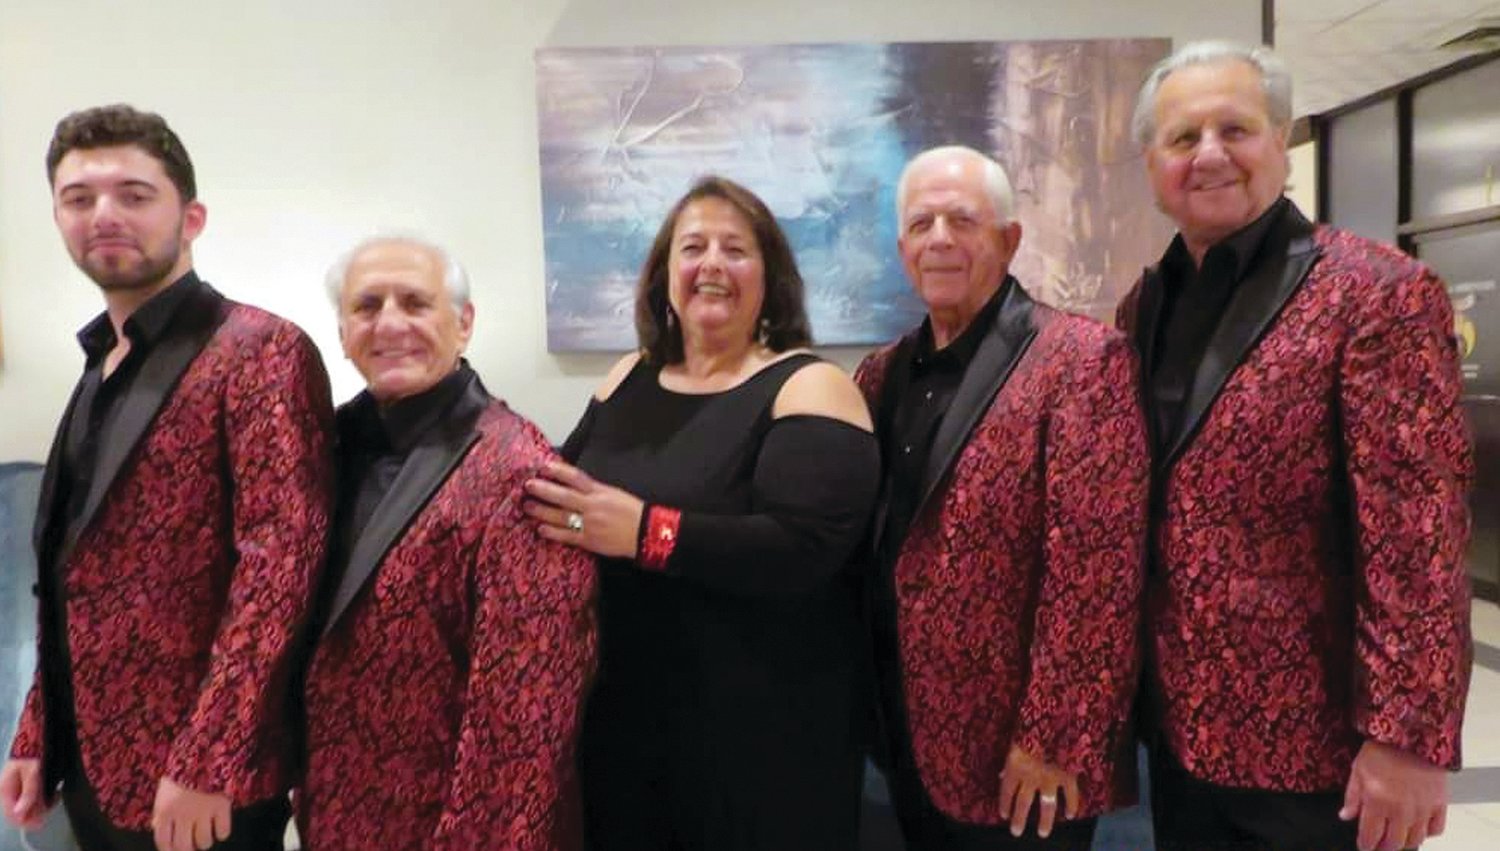 CRAVING CROONERS? Classic Blend, a highly-accomplished and popular quintet will kick off the North Providence Summer Concert Series on Monday evening, July 25 inside Gov. Notte Park. The talented group include, from left: Ron Giorgio, Jack Mento, Maria Russo, Ron Iacabucci and Peter Goneconte.